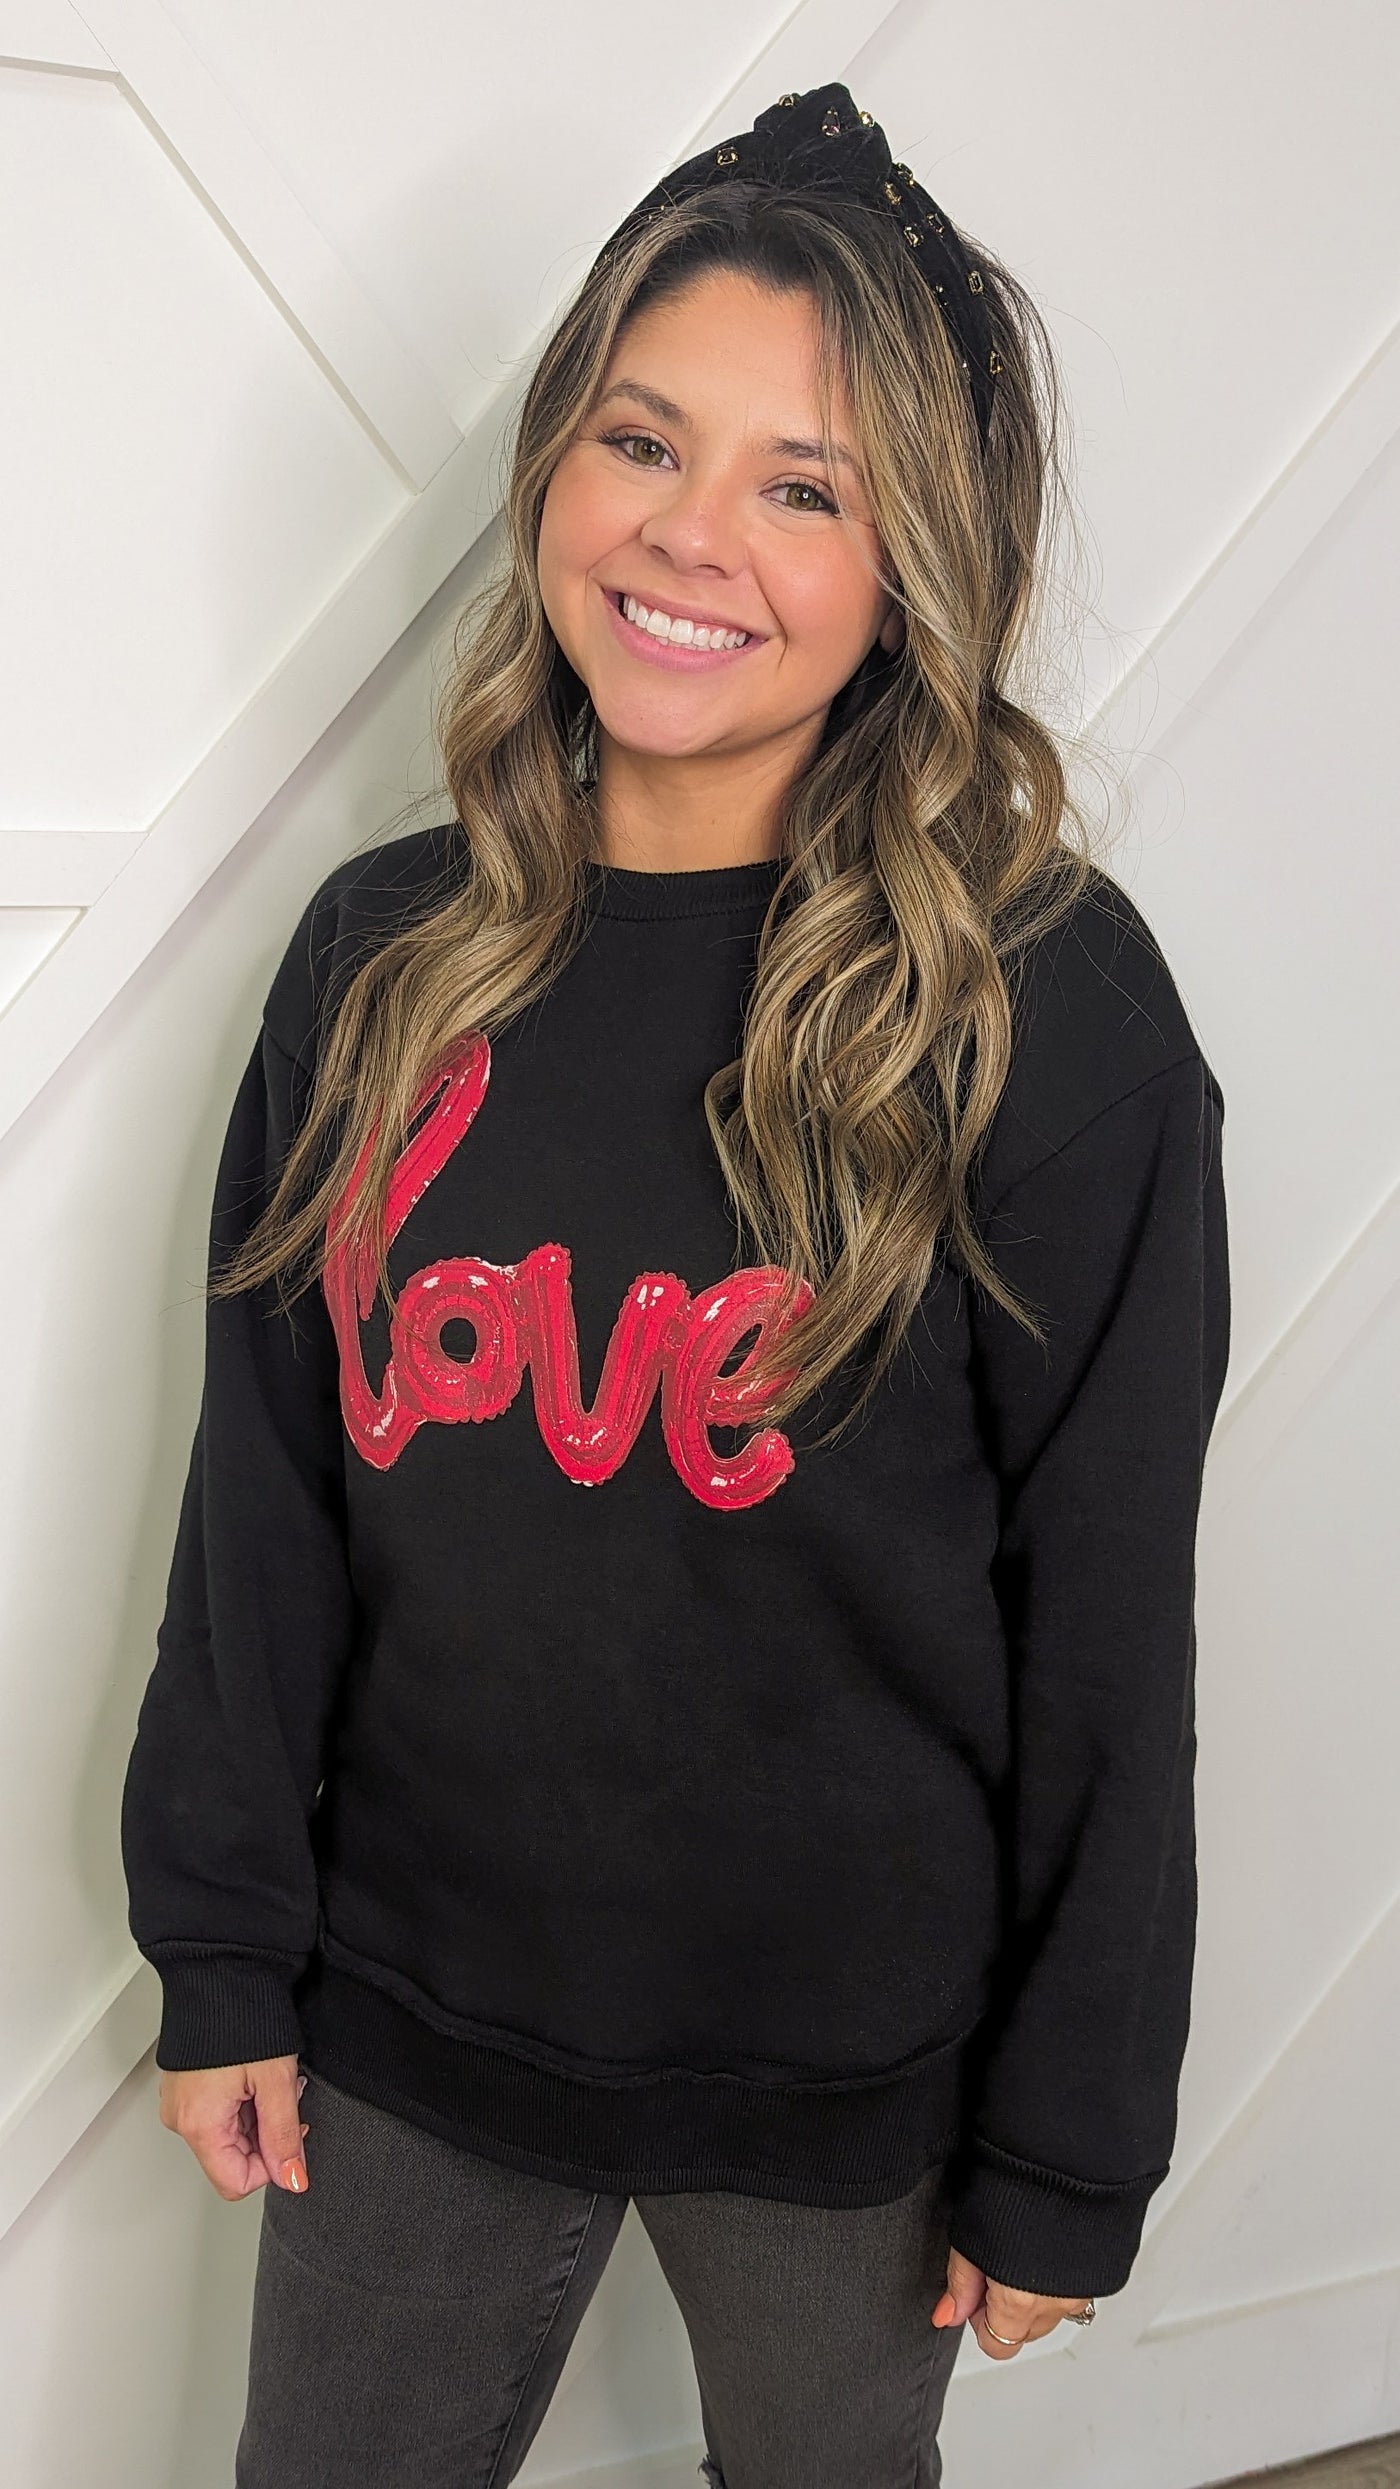 LOVE on Black French Terry Sweatshirt With Ribbed Knit